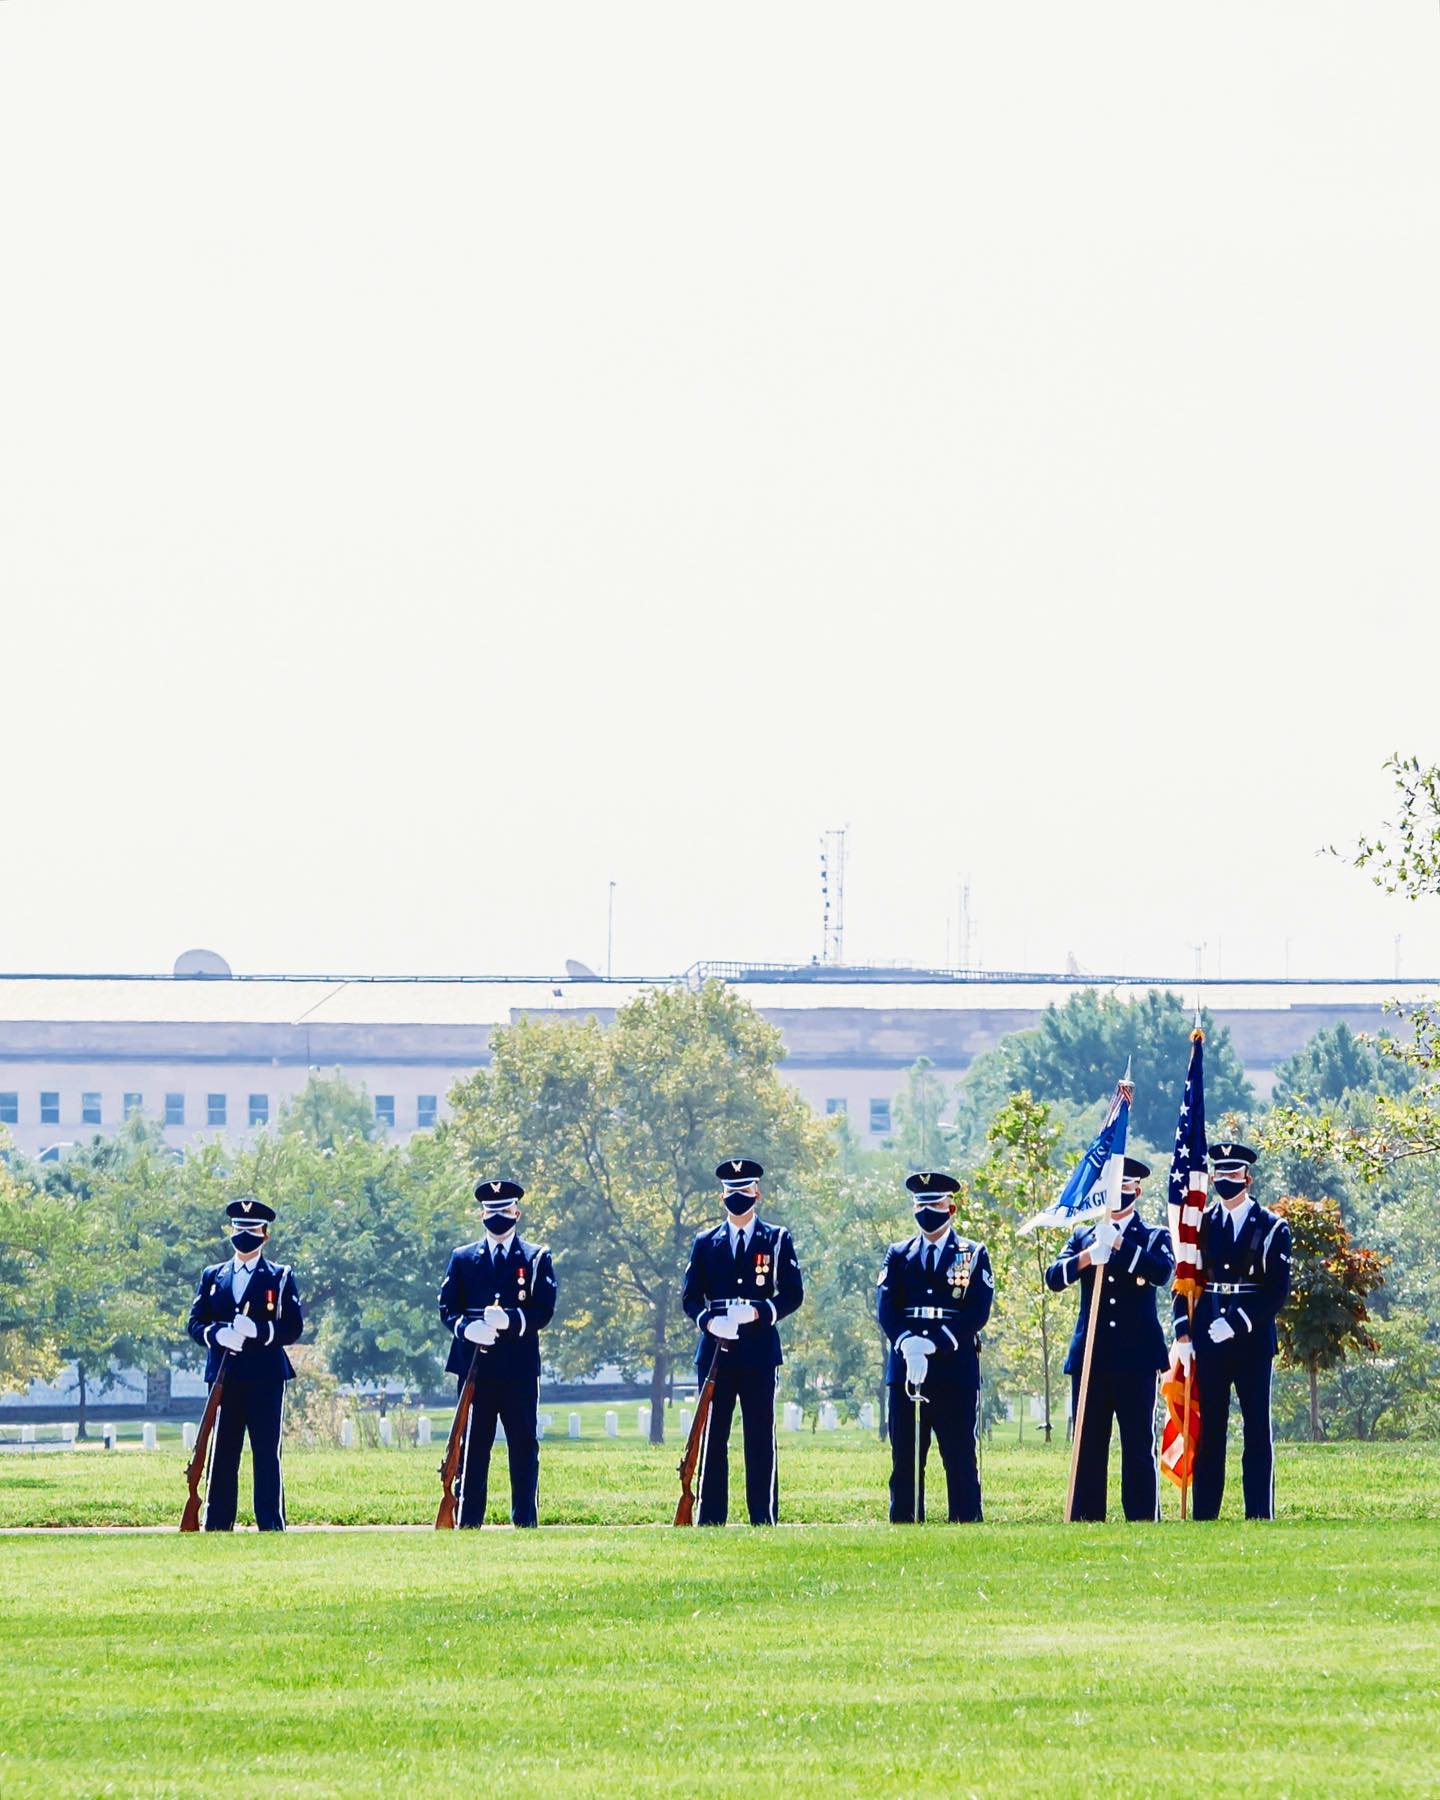 A U.S. Air Force Colorguard stands at parade rest in preparation for a full honors military funeral in front of the Pentagon on August 28th, 2020.

These airmen are part of the color team with The U.S. Air Force Honor Guard stationed at Fort Myer, Virginia.